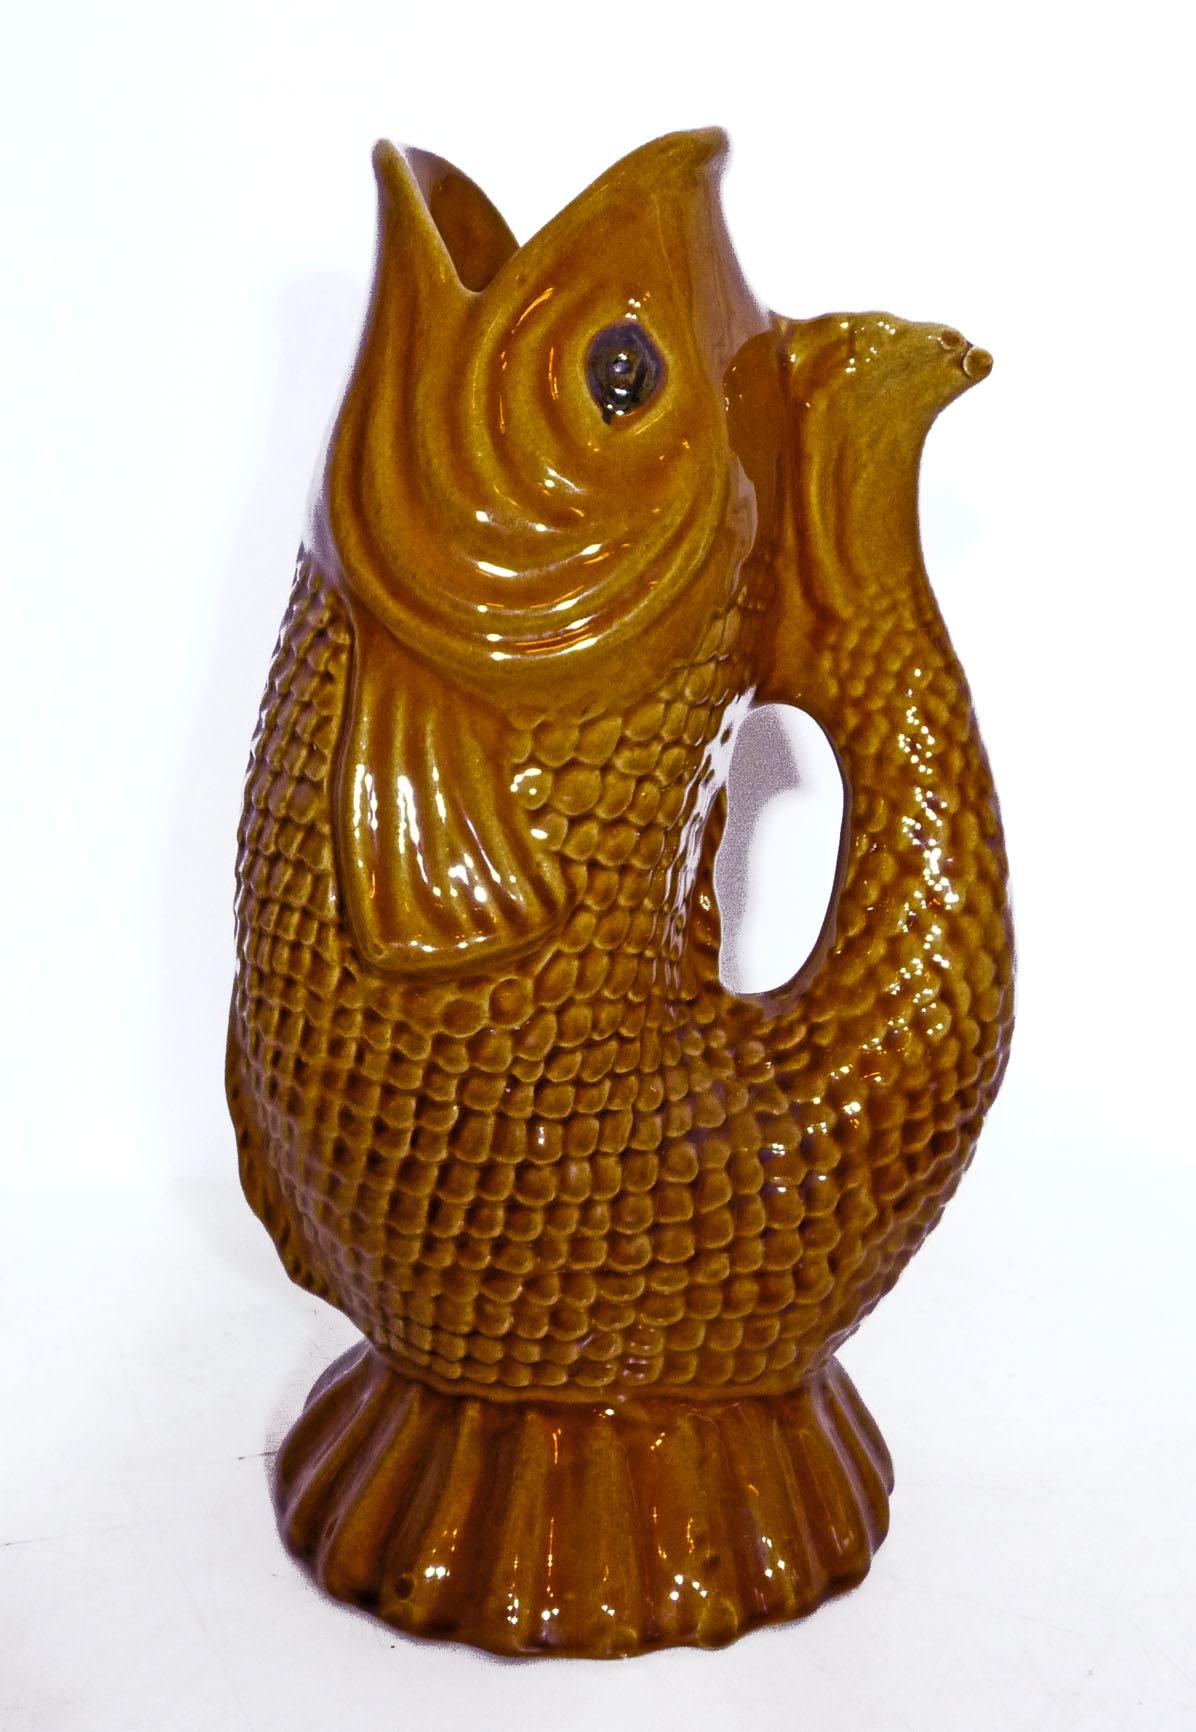 Modernist Portuguese Majolica amber glazed ceramic gurgle fish jug/tall pitcher
Glazed earthenware made in Portugal.

Measures: 
Height 12.6 in /32 cm
Width 8 in /20 cm
Deep 6 in / 15 cm
Weight 3.8 lb. (1.600 kg).
Cap 1.5 Lt.